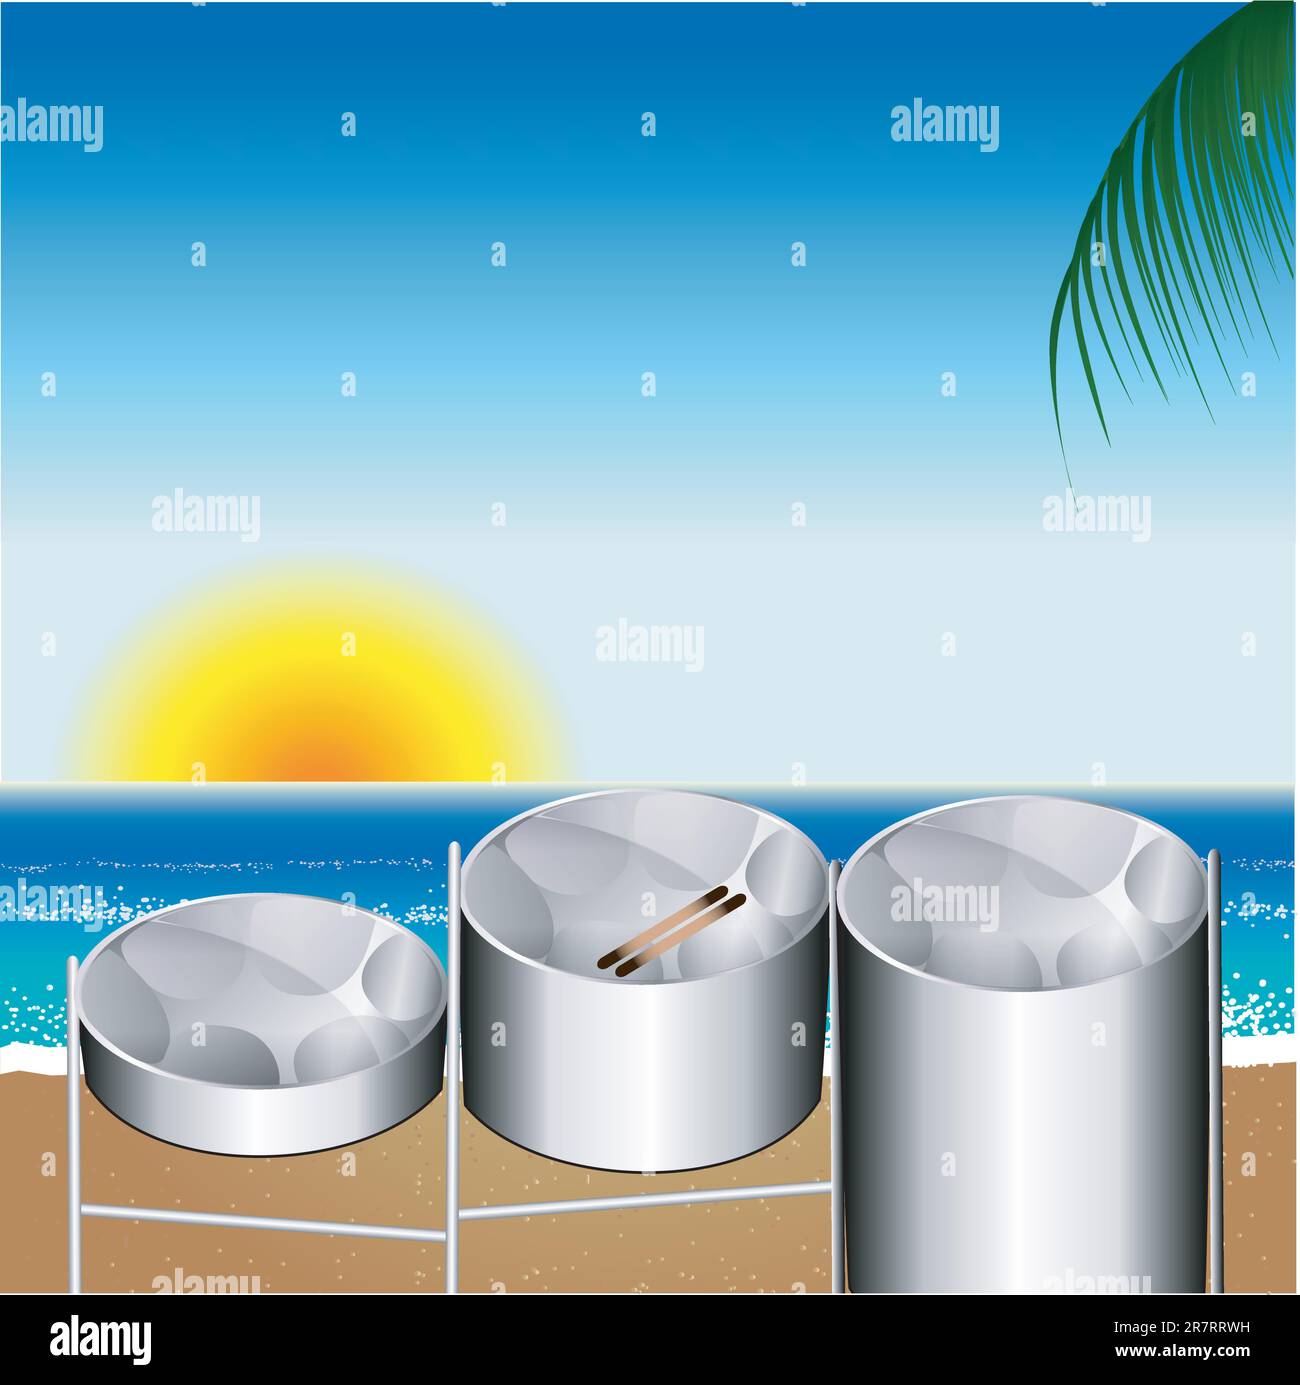 Vector Illustration of three variations of Steel Pan Drums on the beach invented in Trinidad and Tobago. Stock Vector